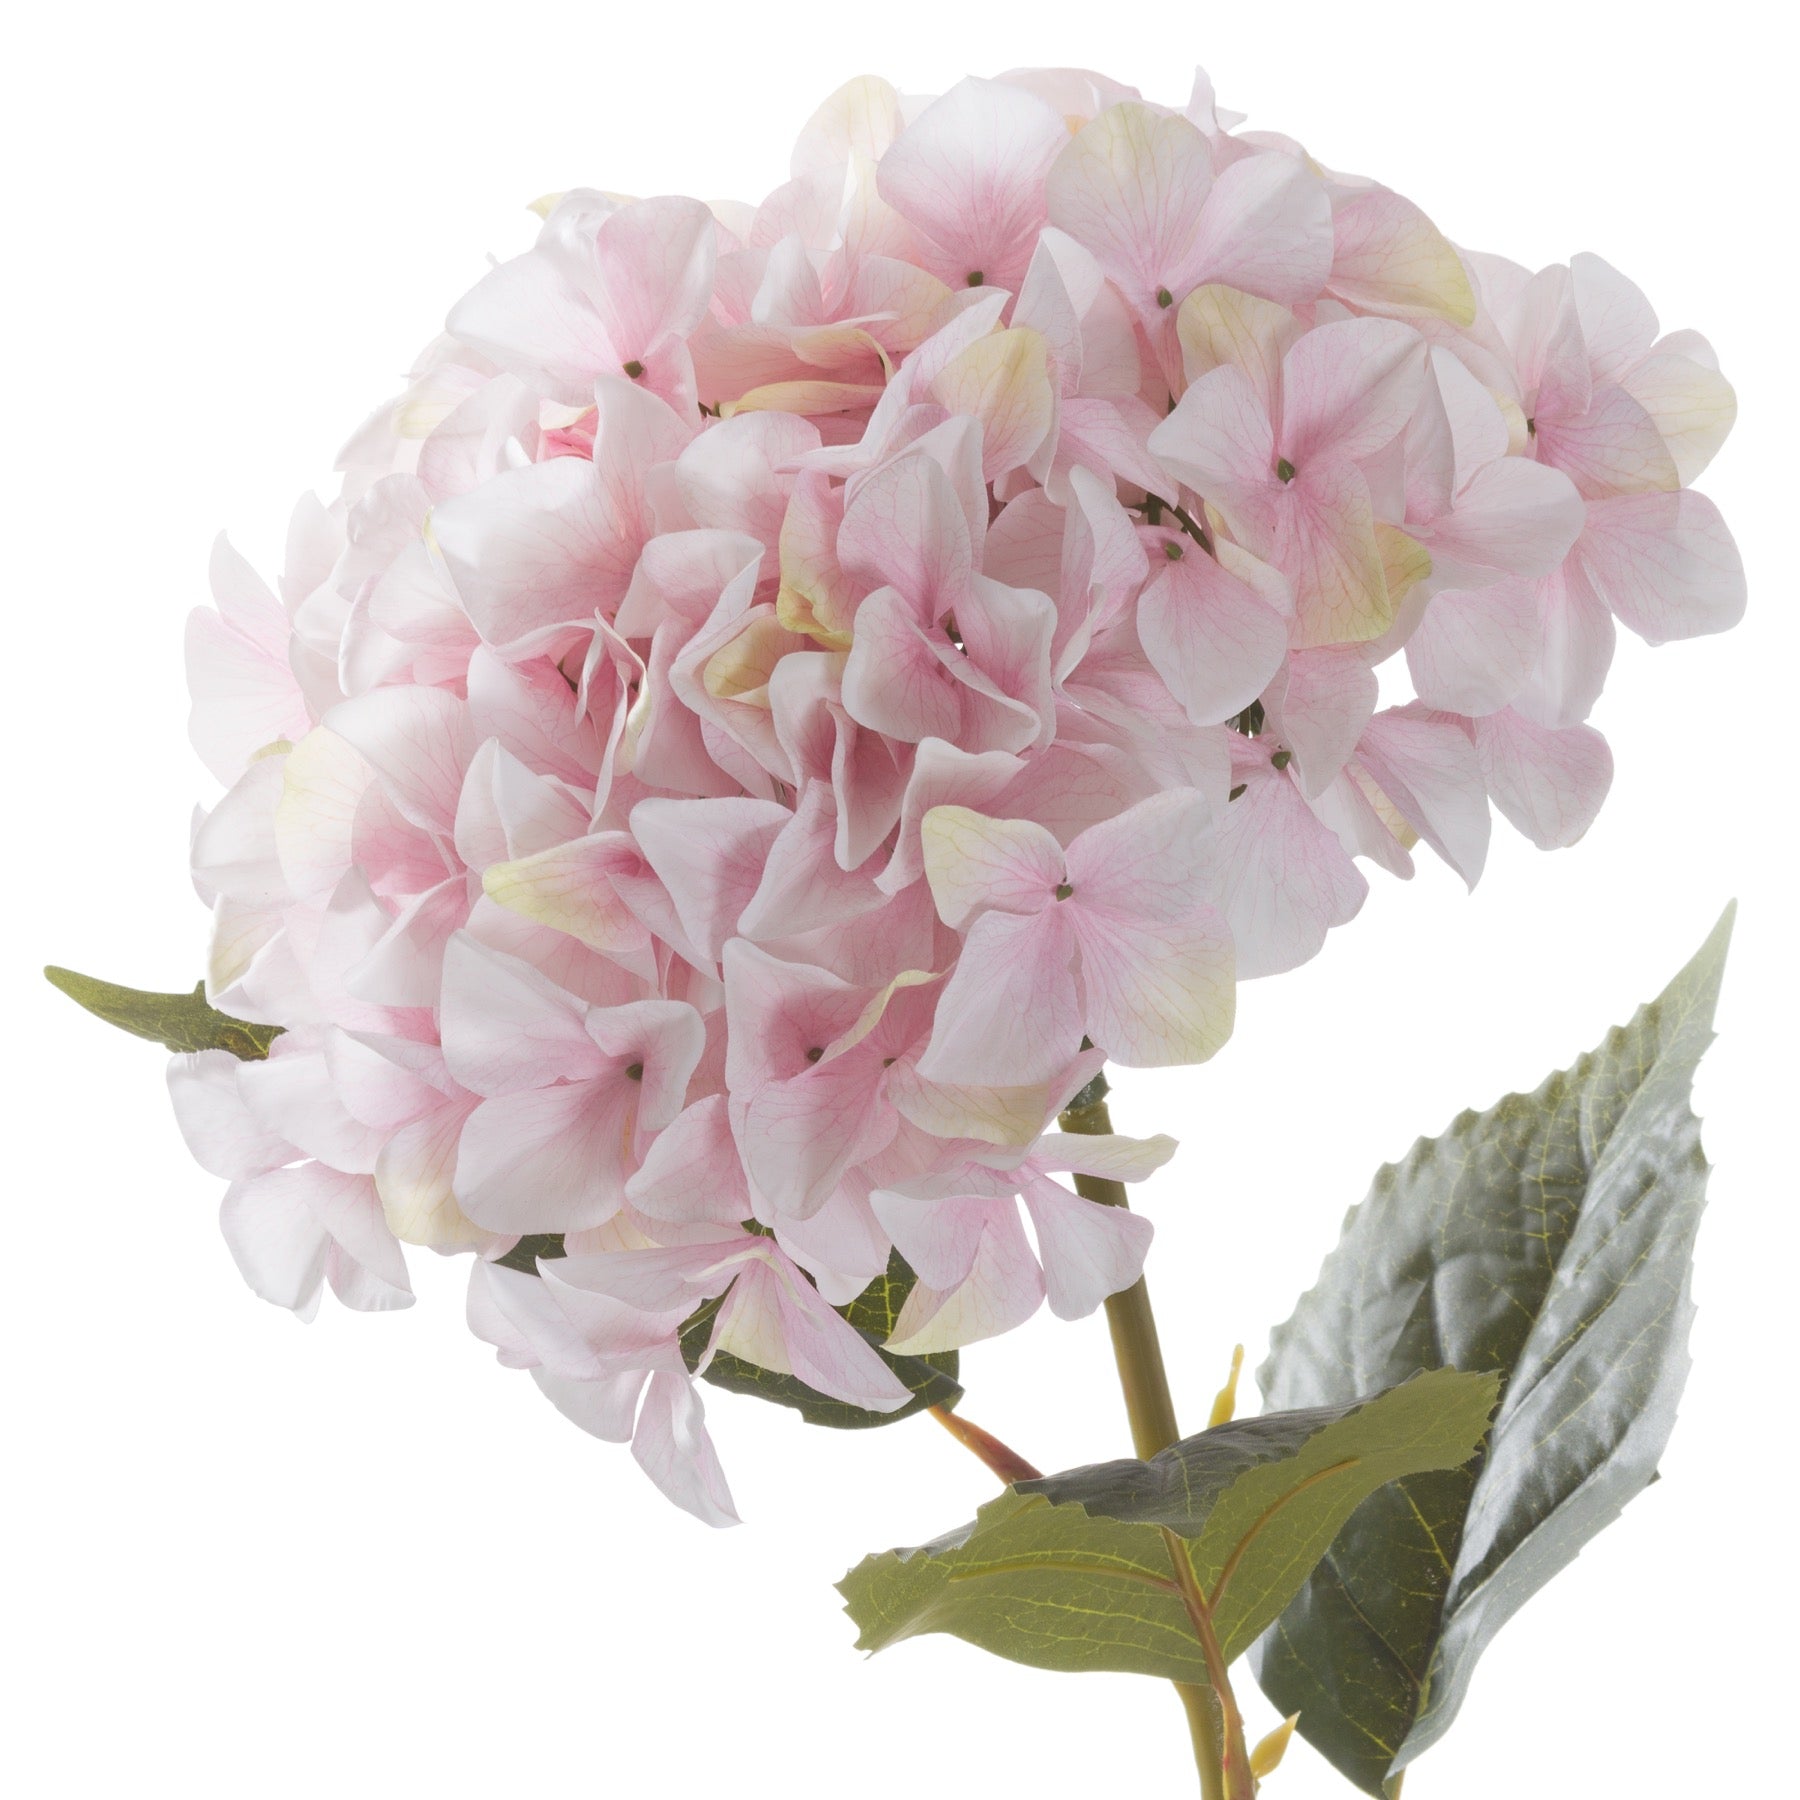 View Giant Pink Hydrangea information